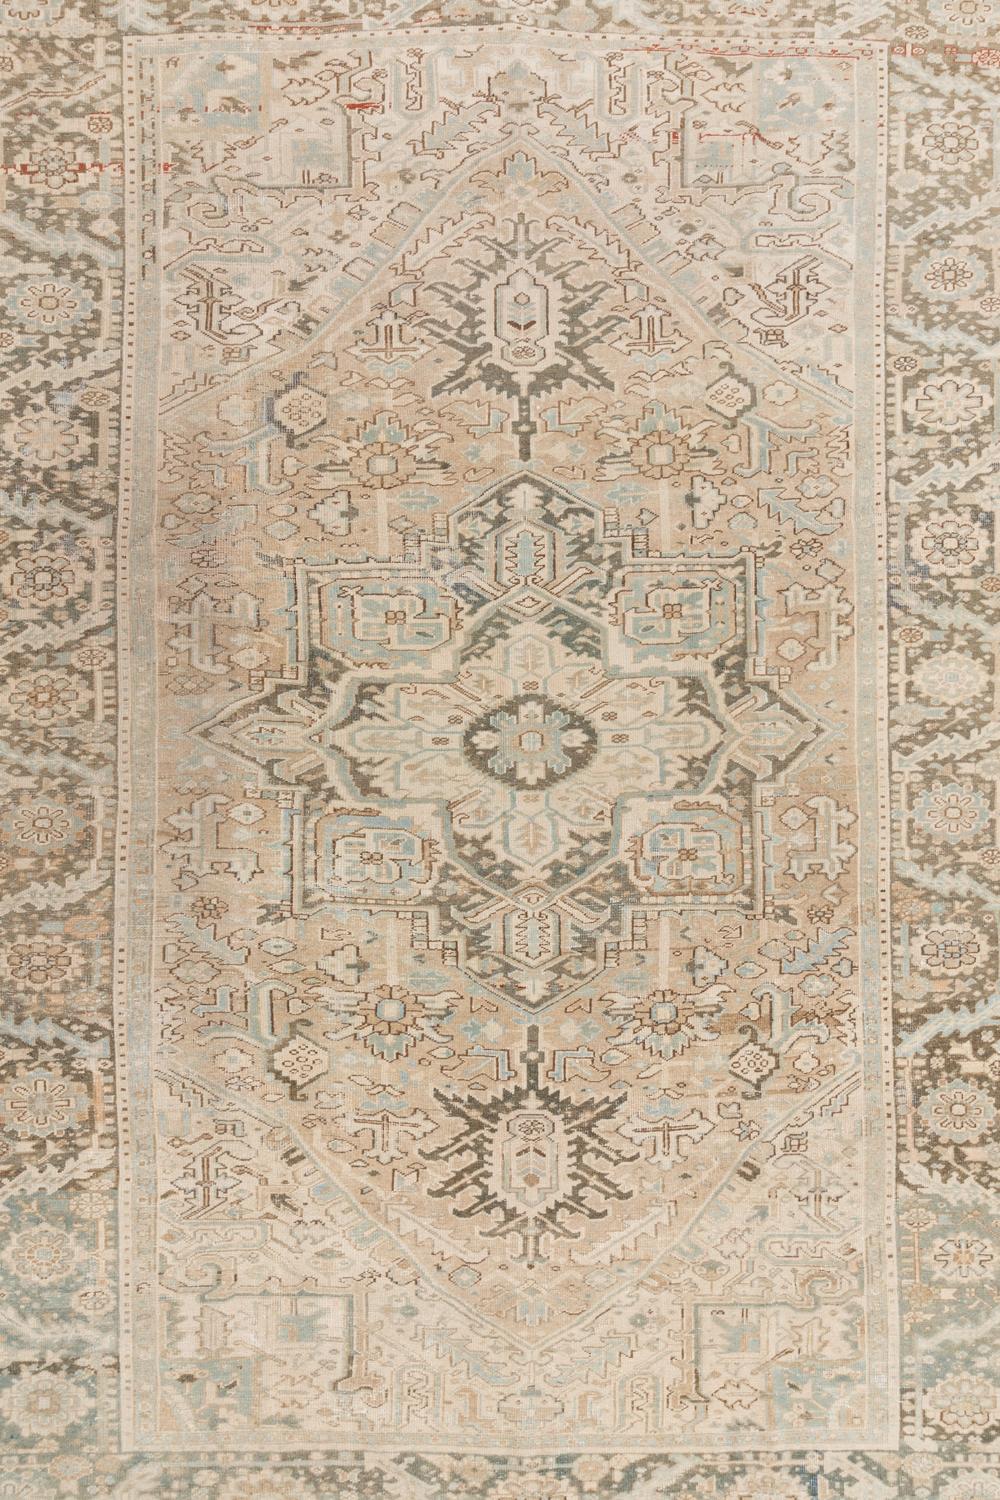 Age: second quarter of the 20th century 

Pile: Low-medium 

Wear Notes: 1

Material: Wool on Cotton

Vintage rugs are made by hand over the course of months, sometimes years. Their imperfections and wear are evidence of the hard working